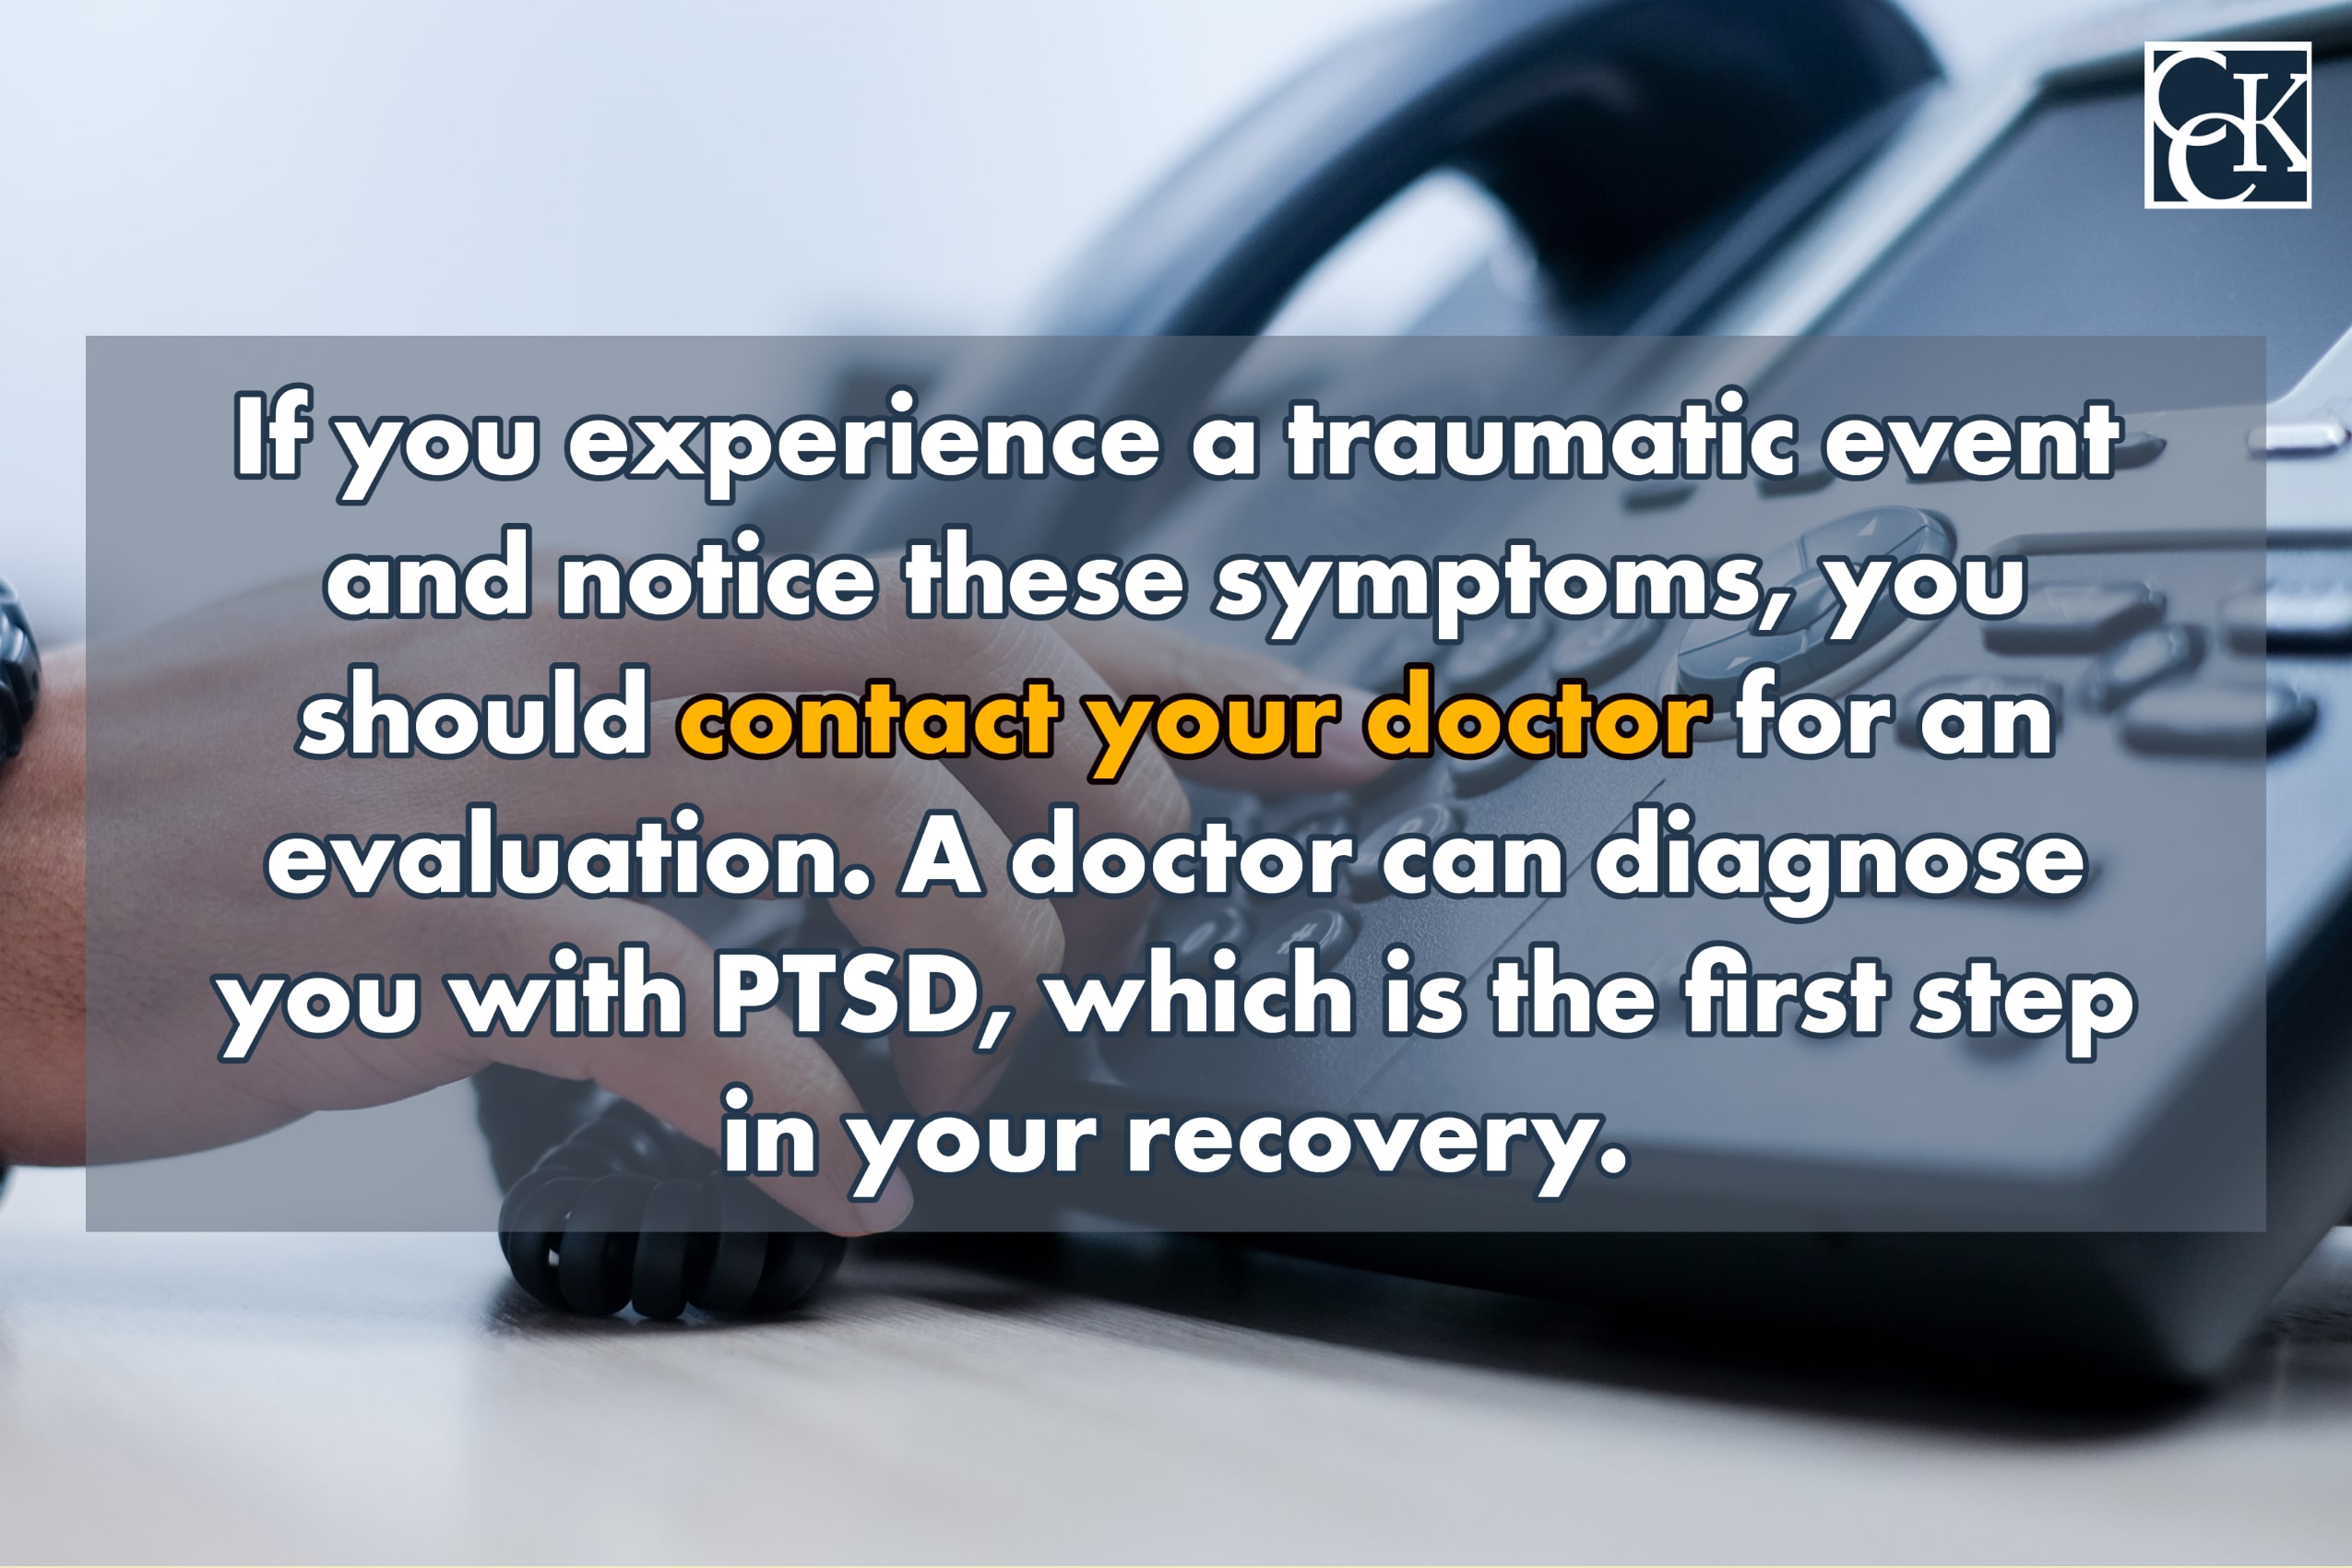 If you experience a traumatic event and notice these symptoms, you should contact your doctor for an evaluation. A doctor can diagnose you with PTSD, which is the first step in your recovery. 